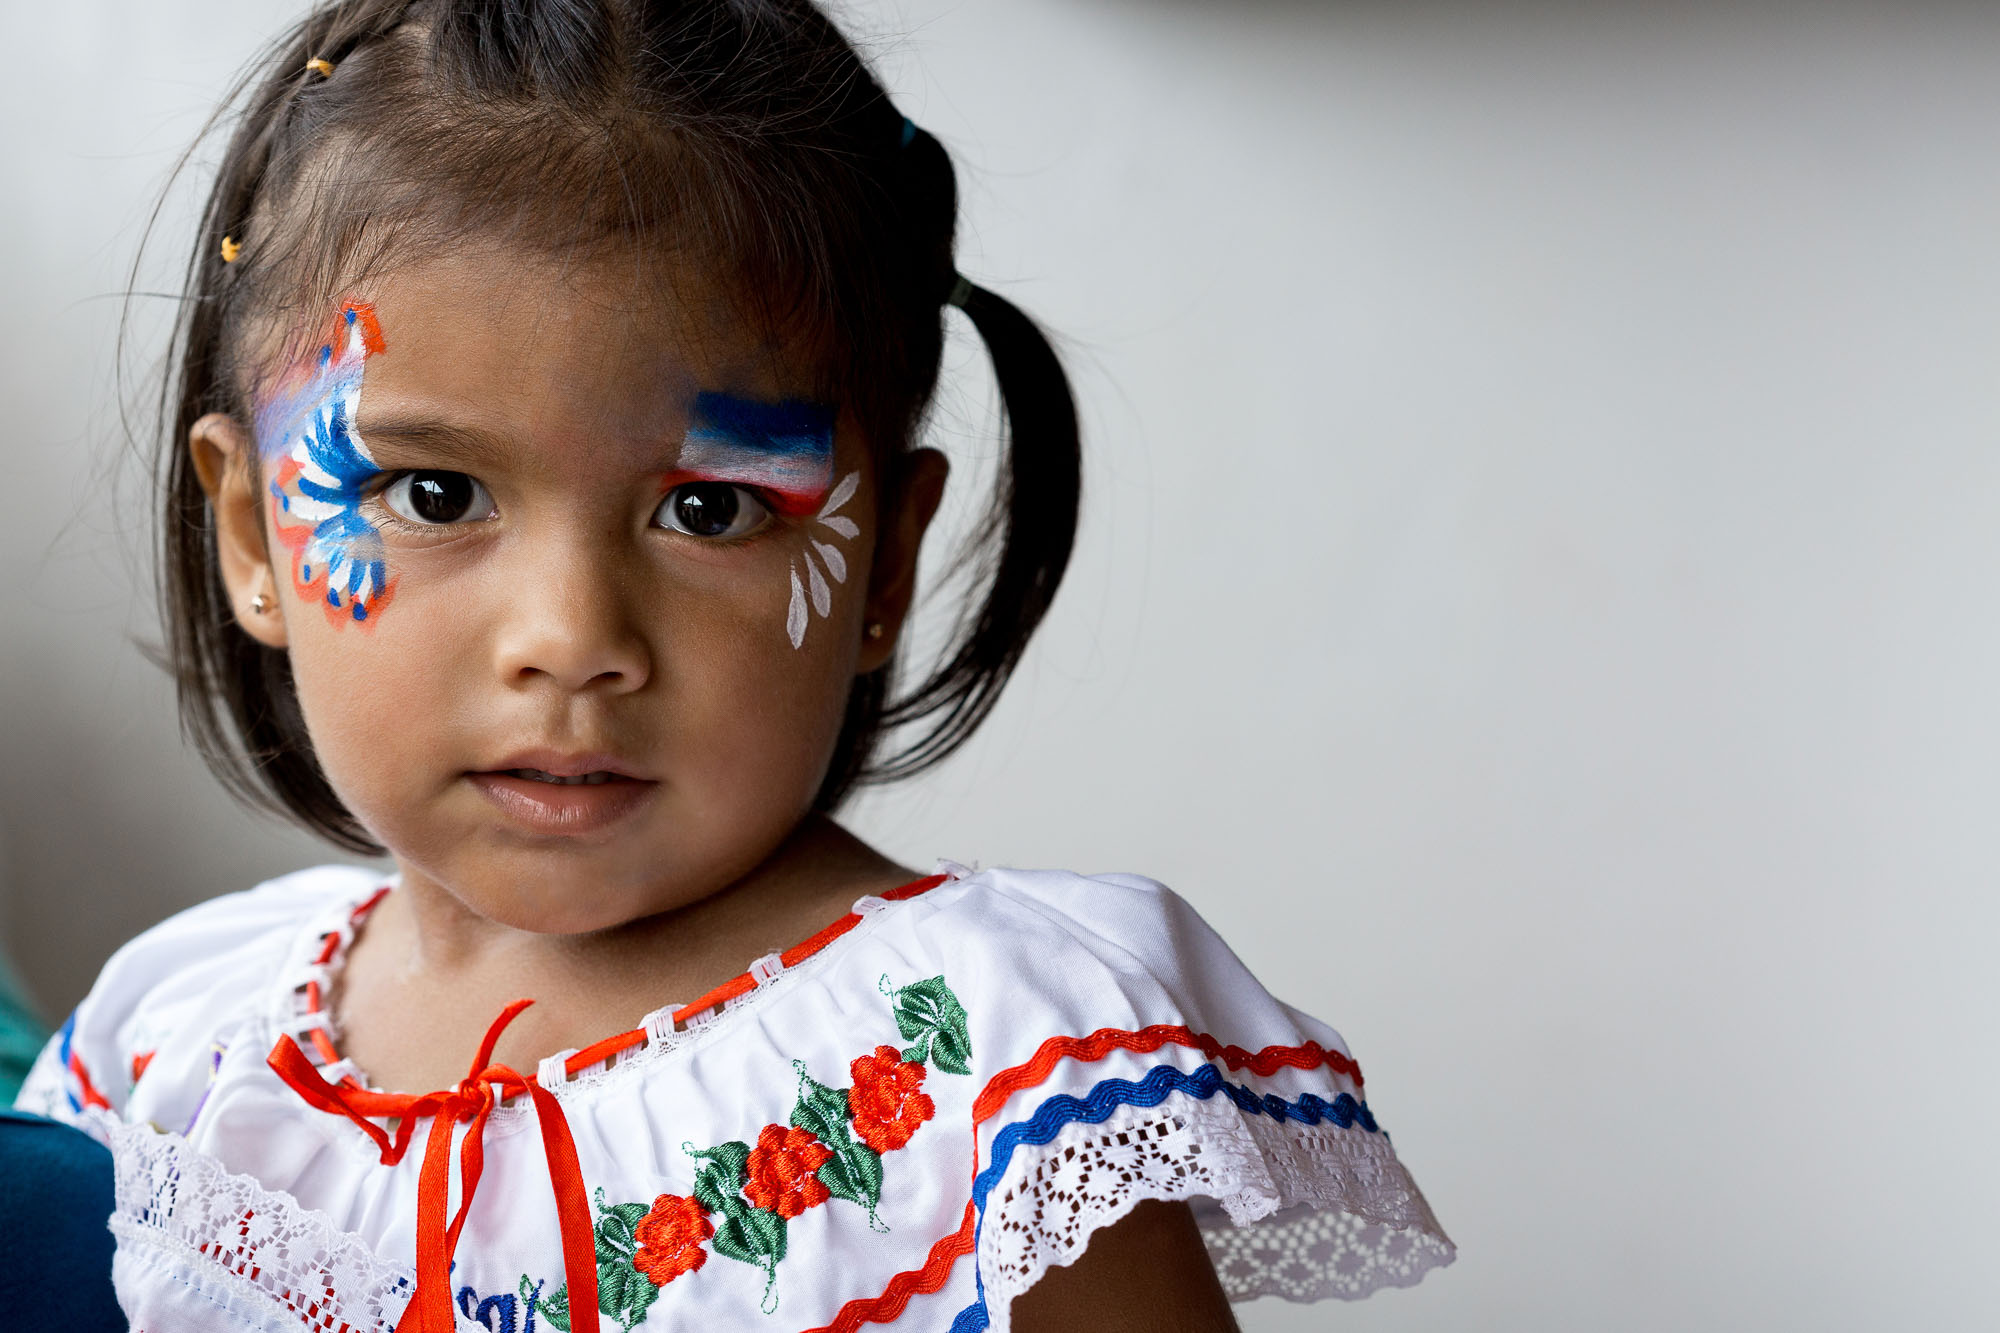 Little girl in campesino outfit (traditional Costa Rican clothing) with face paint